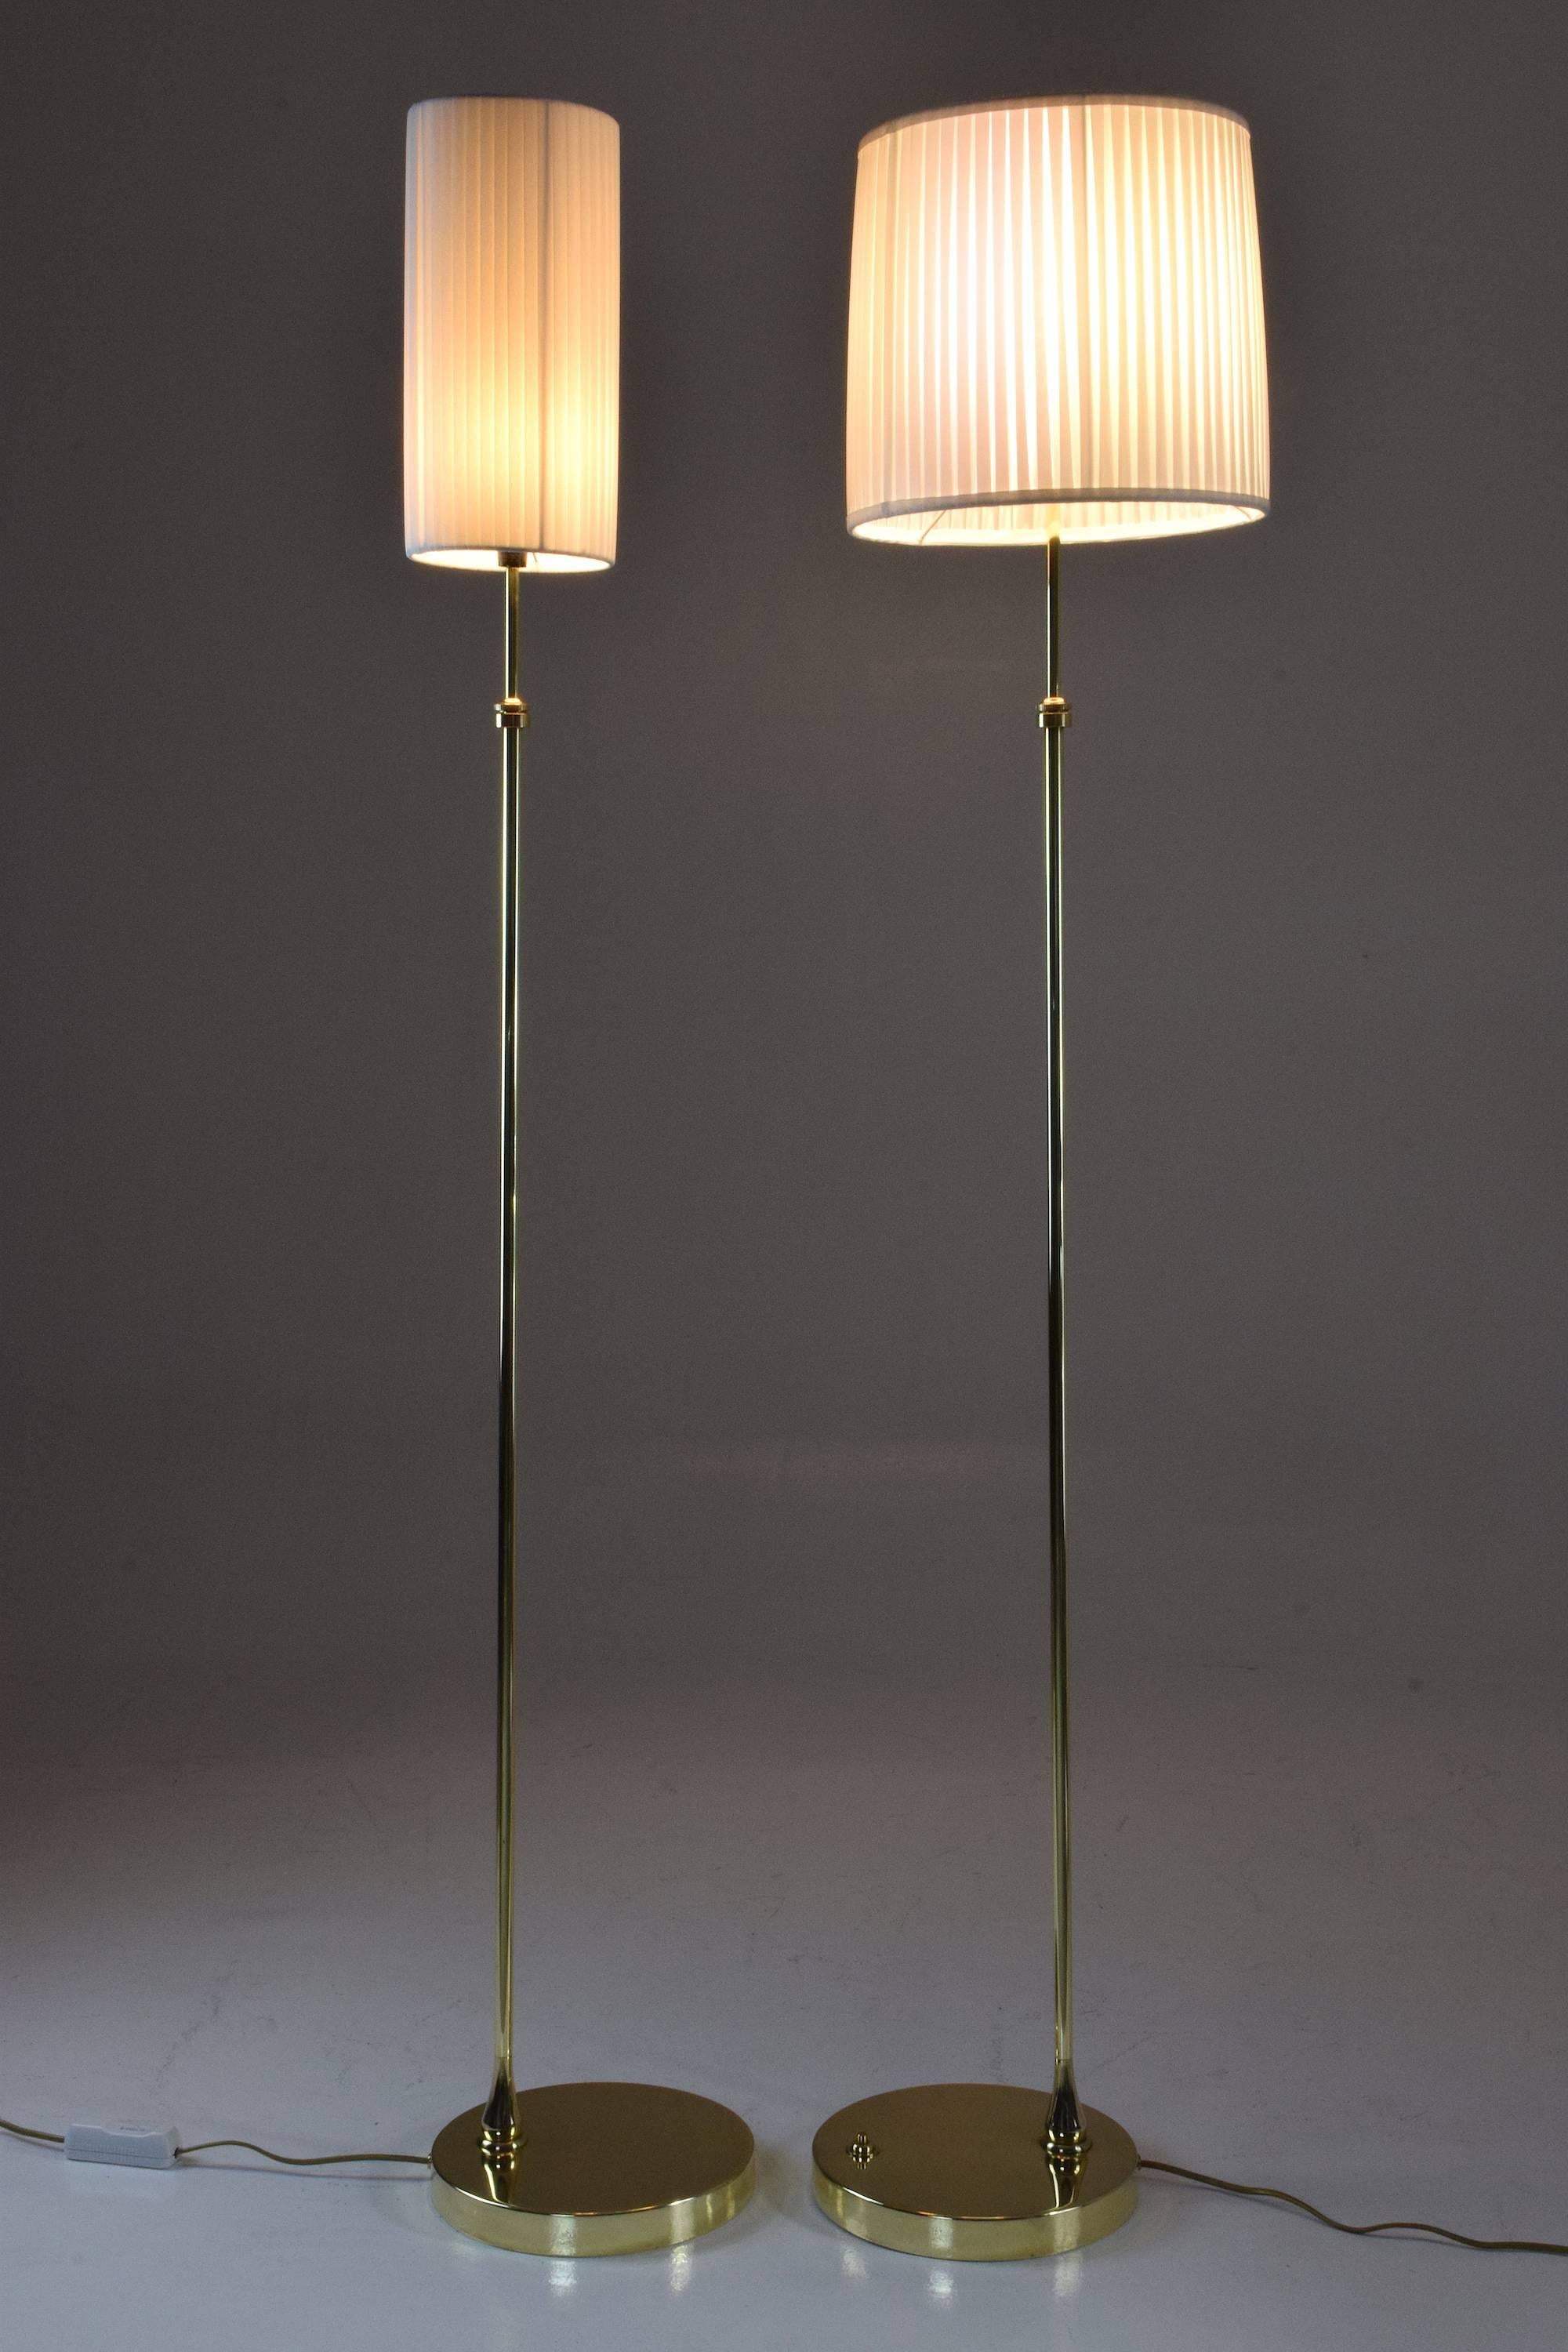 Polished Equilibrium-I Contemporary Handcrafted Adjustable Brass Floor Lamp